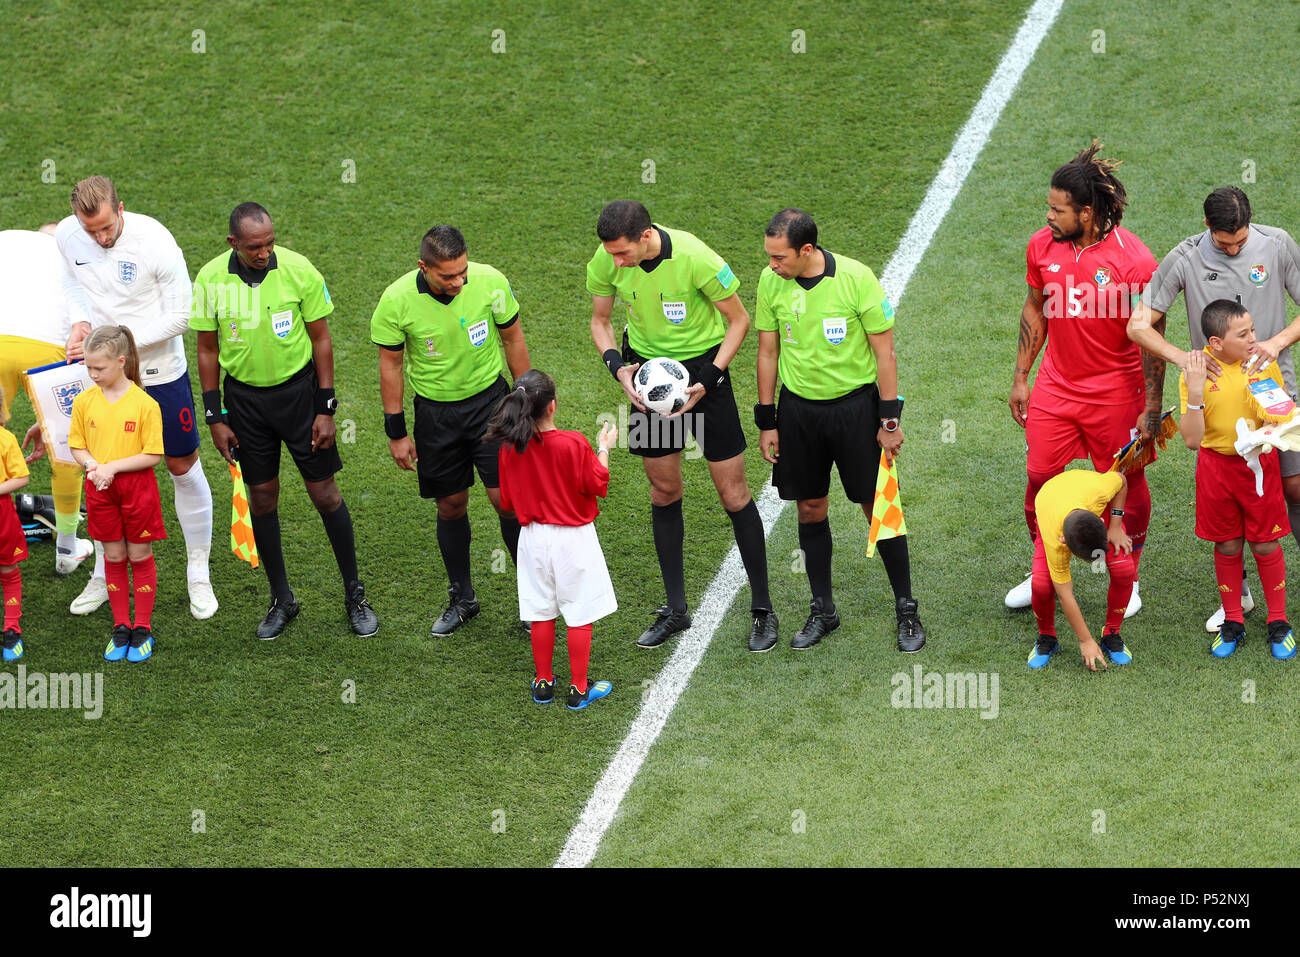 Ball Carrier Alysia Singh, 8 from Huddersfield shakes hands with the England players ahead of the FIFA World Cup Group G match at the Nizhny Novgorod Stadium. PRESS ASSOCIATION Photo. Picture date: Sunday June 24, 2018. See PA story WORLDCUP England. Photo credit should read: Tim Goode/PA Wire. Stock Photo